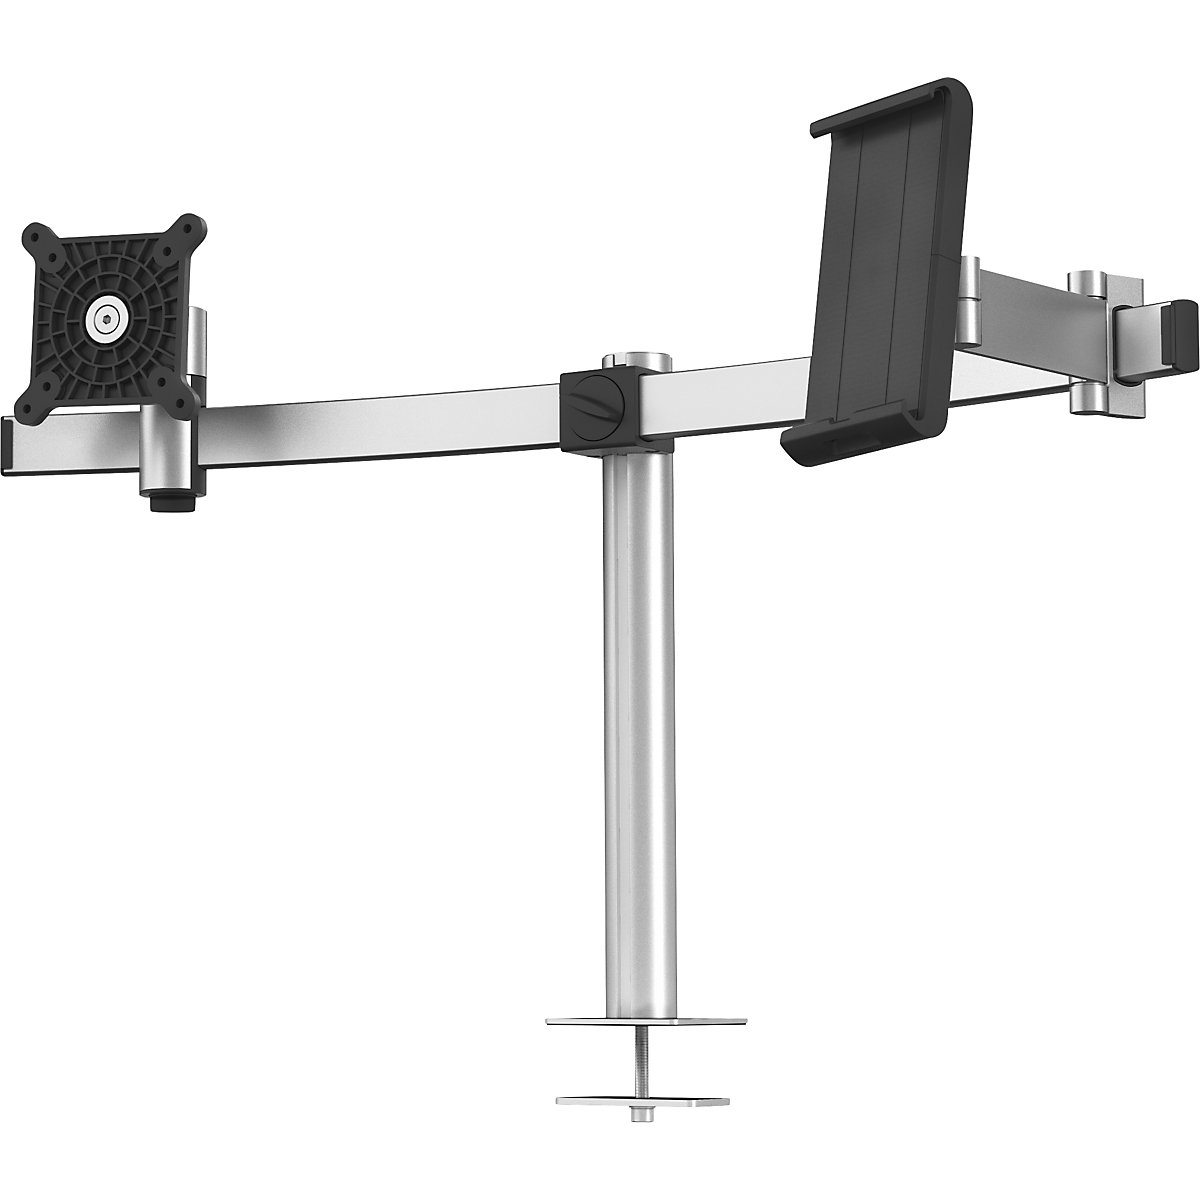 DURABLE – Monitor holder for 1 monitor and 1 tablet, HxWxD 445 x 780 x 190 mm, through-desk mounting